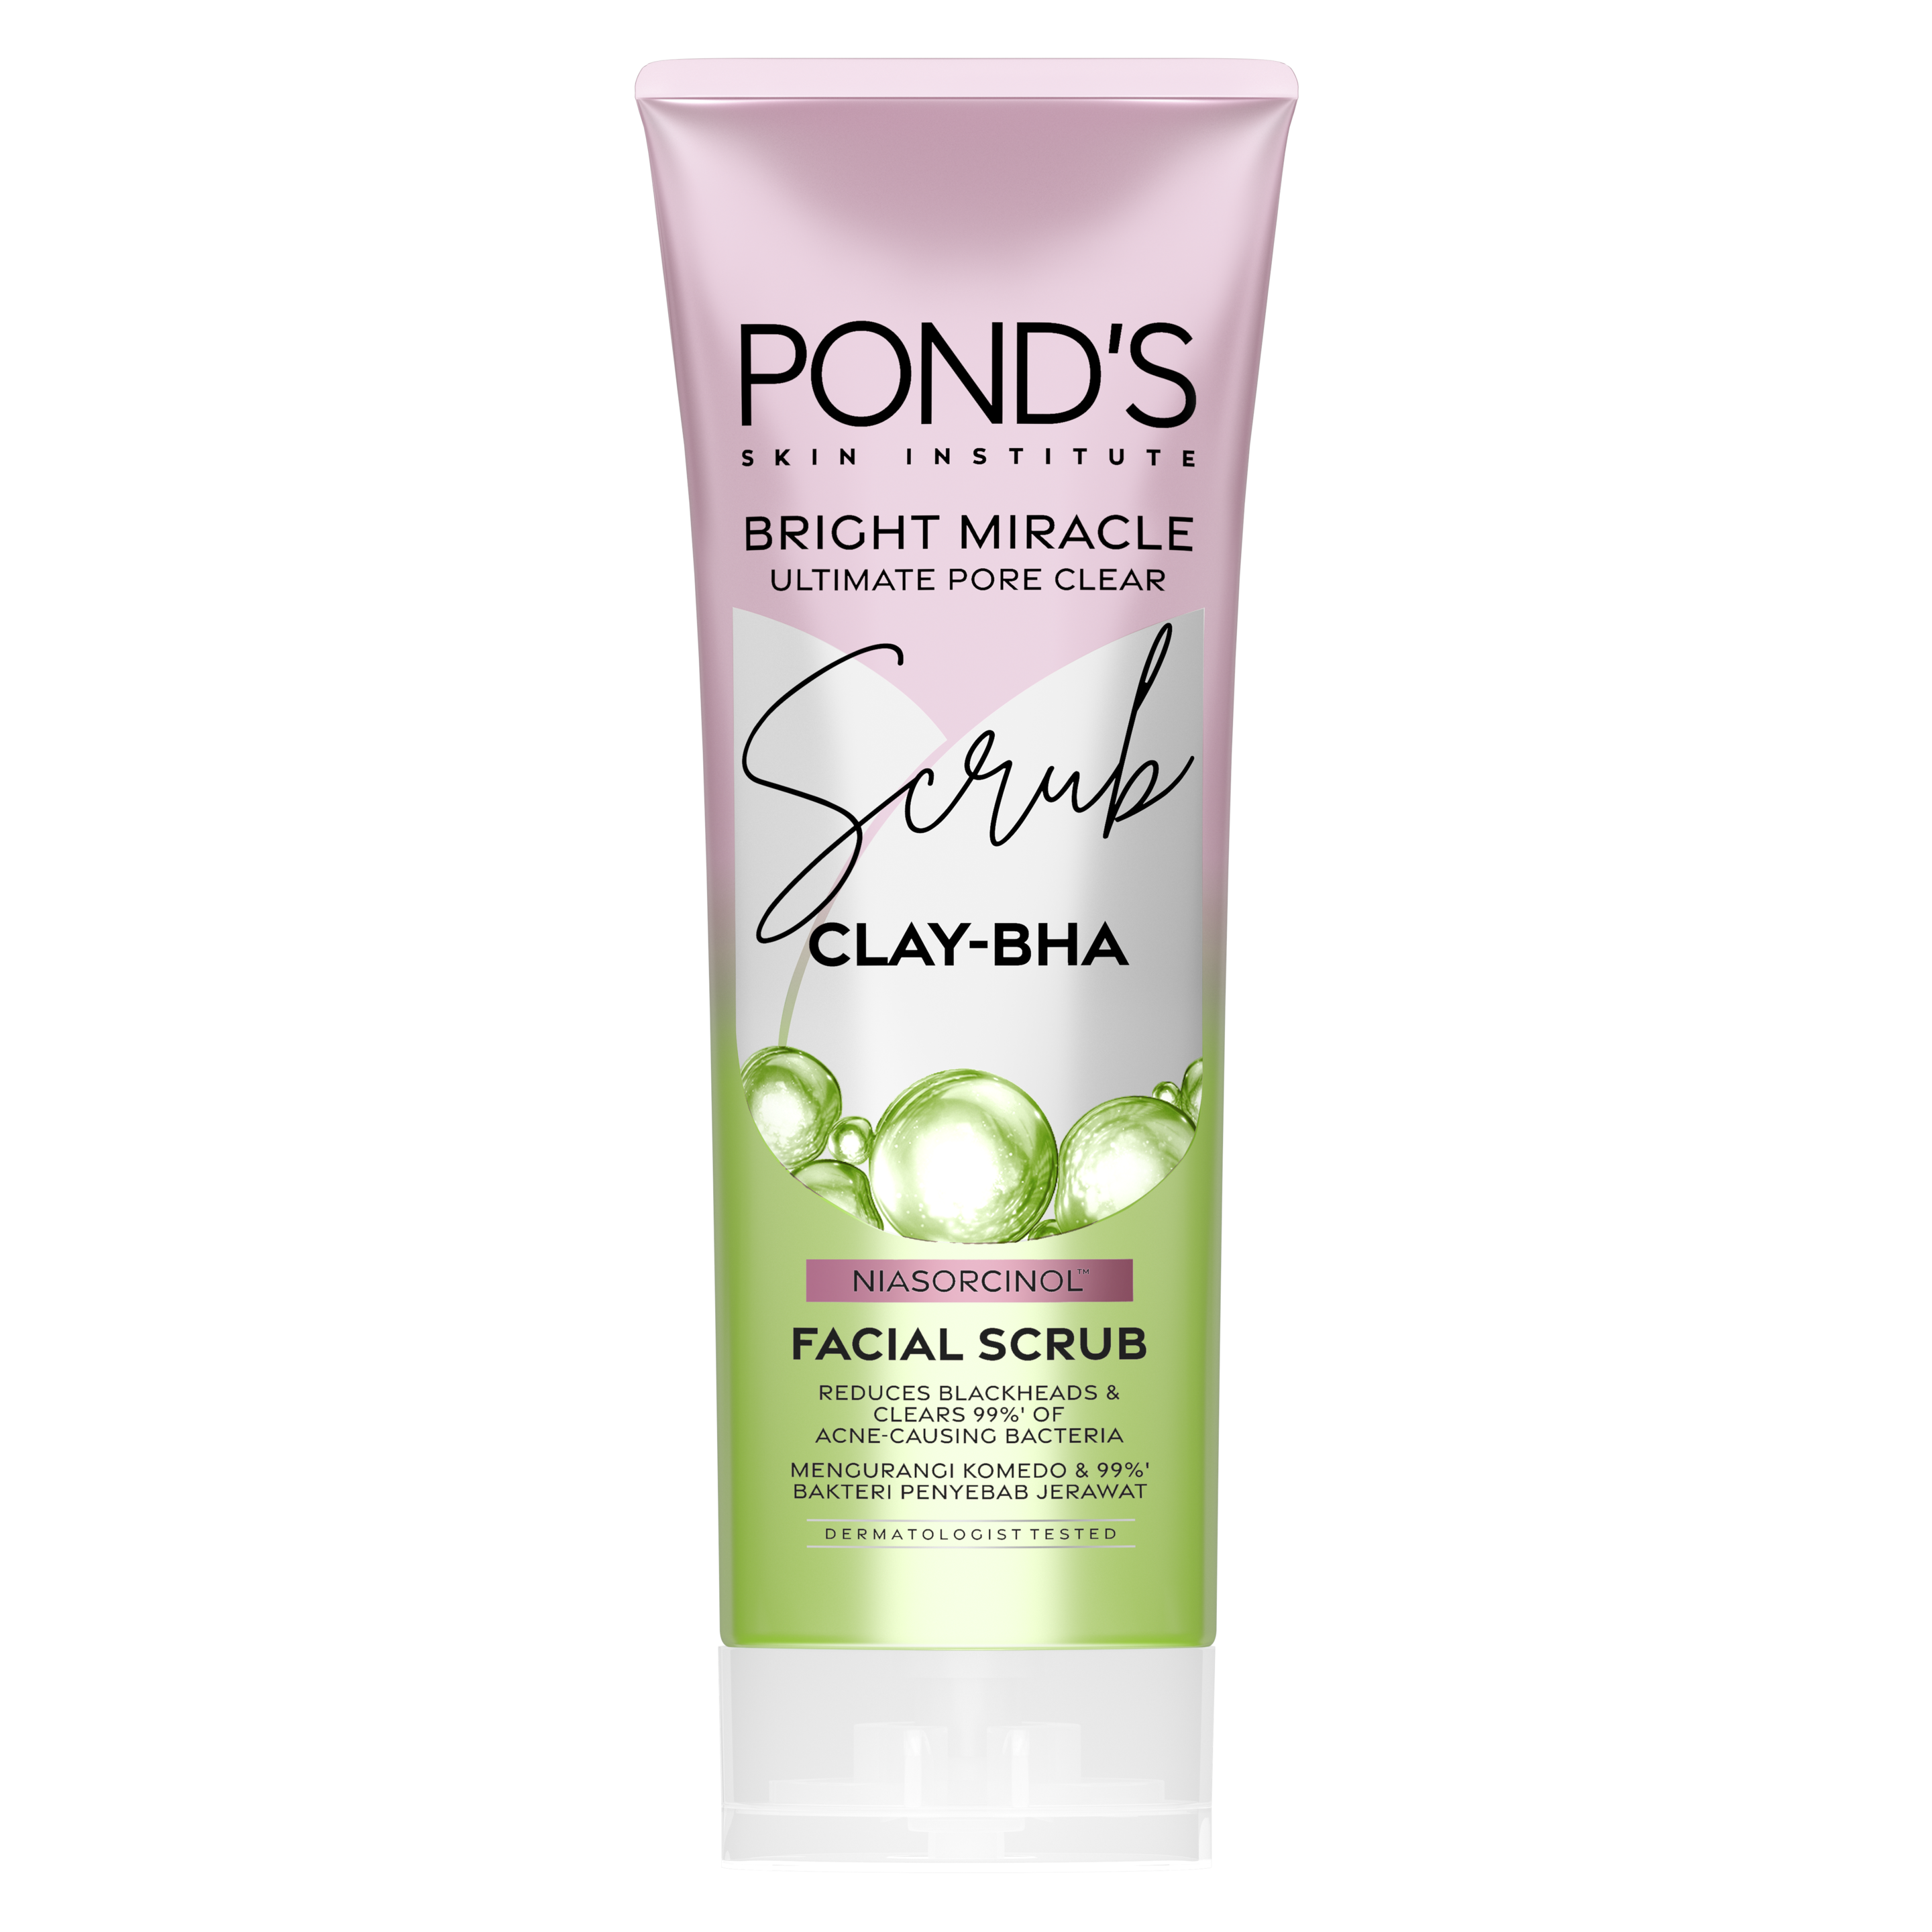 Pond's Bright Miracle Ultimate Pore Clear Facial Scrub